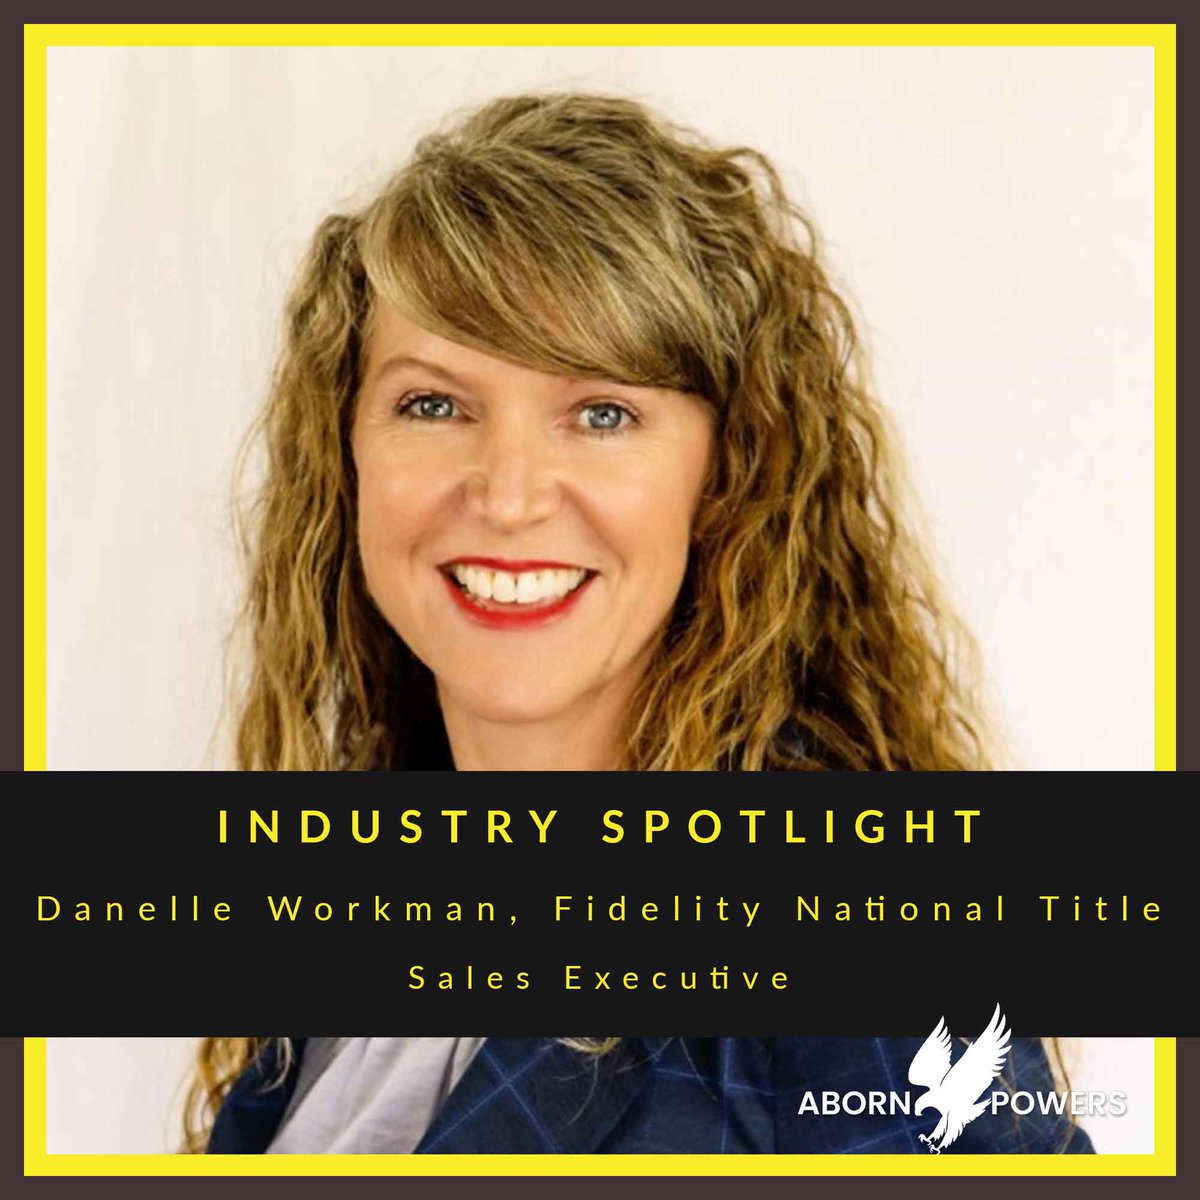 Danelle Workman is an awesome partner in the real estate industry. If you need a title company we recommend her wholeheartedly. #fidelitynationaltitle #danelleworkman #realestate